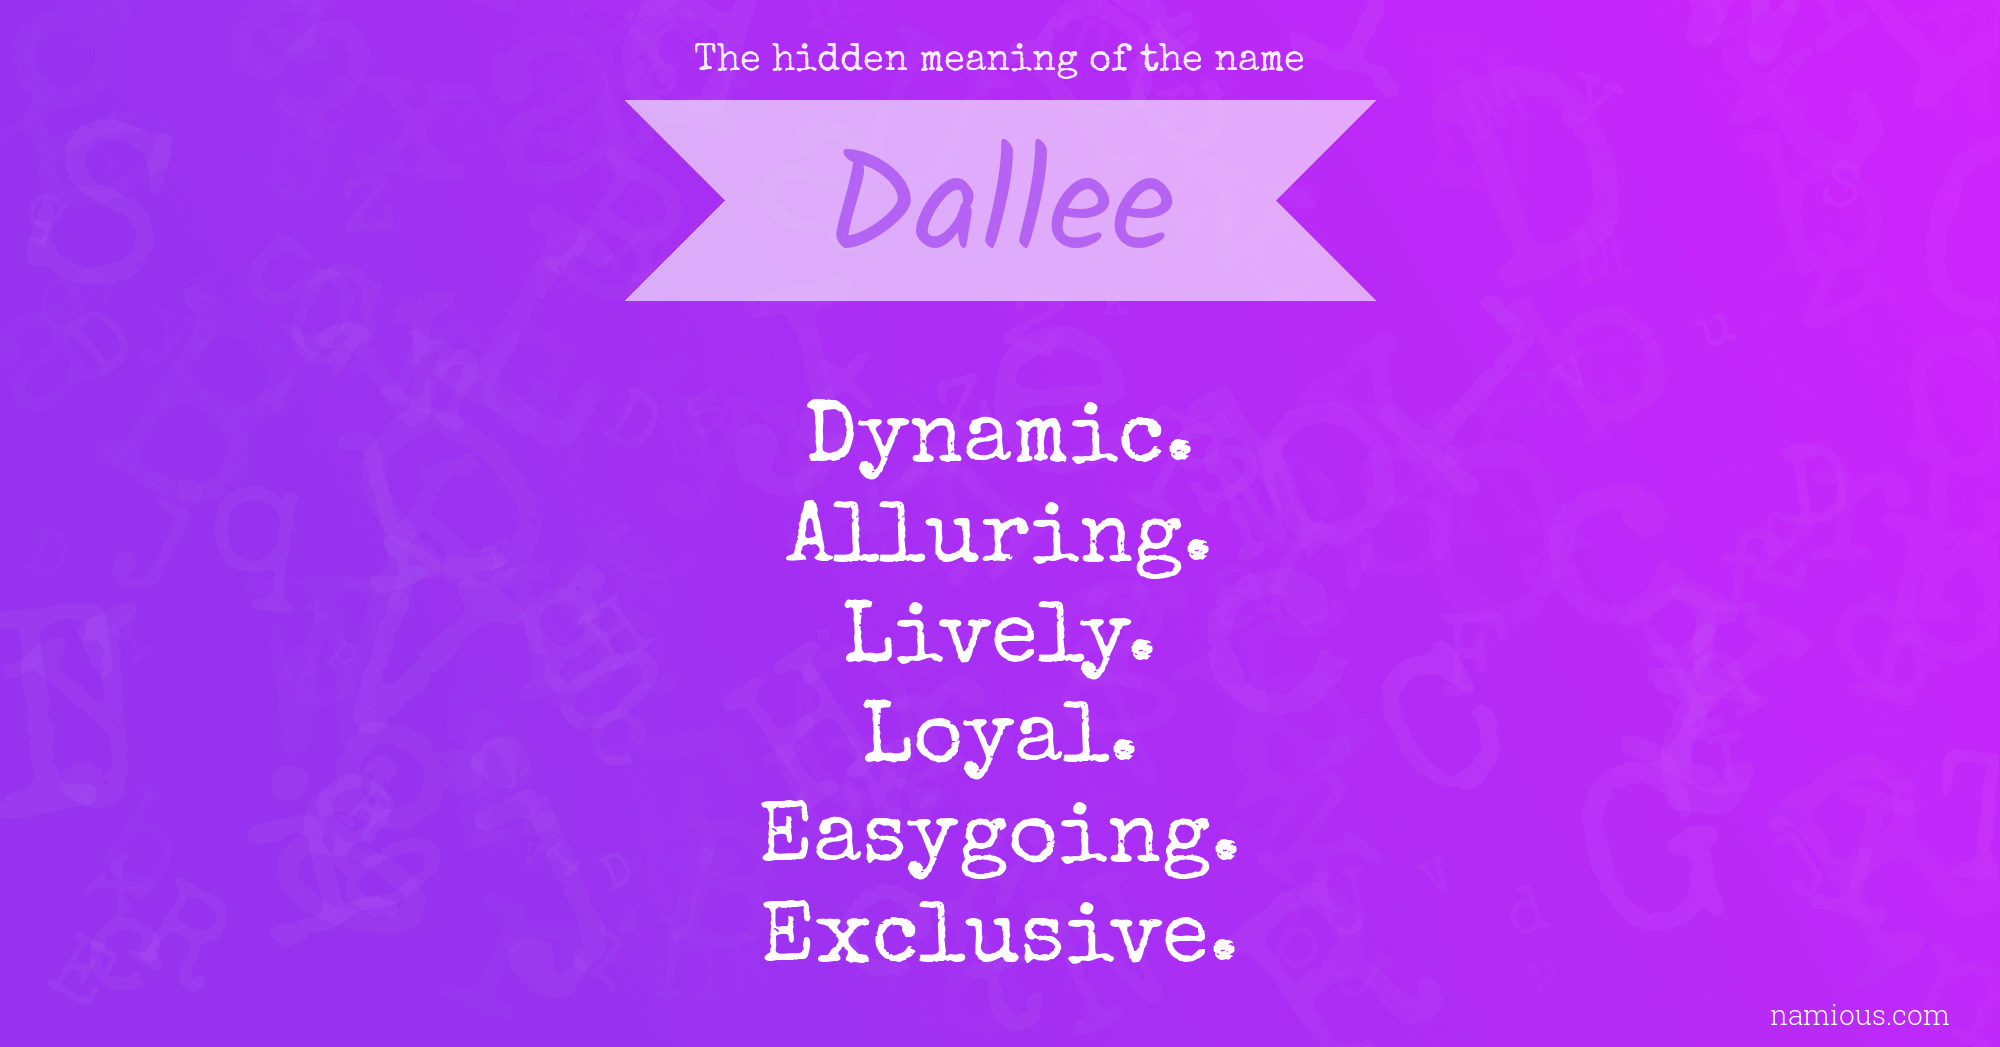 The hidden meaning of the name Dallee